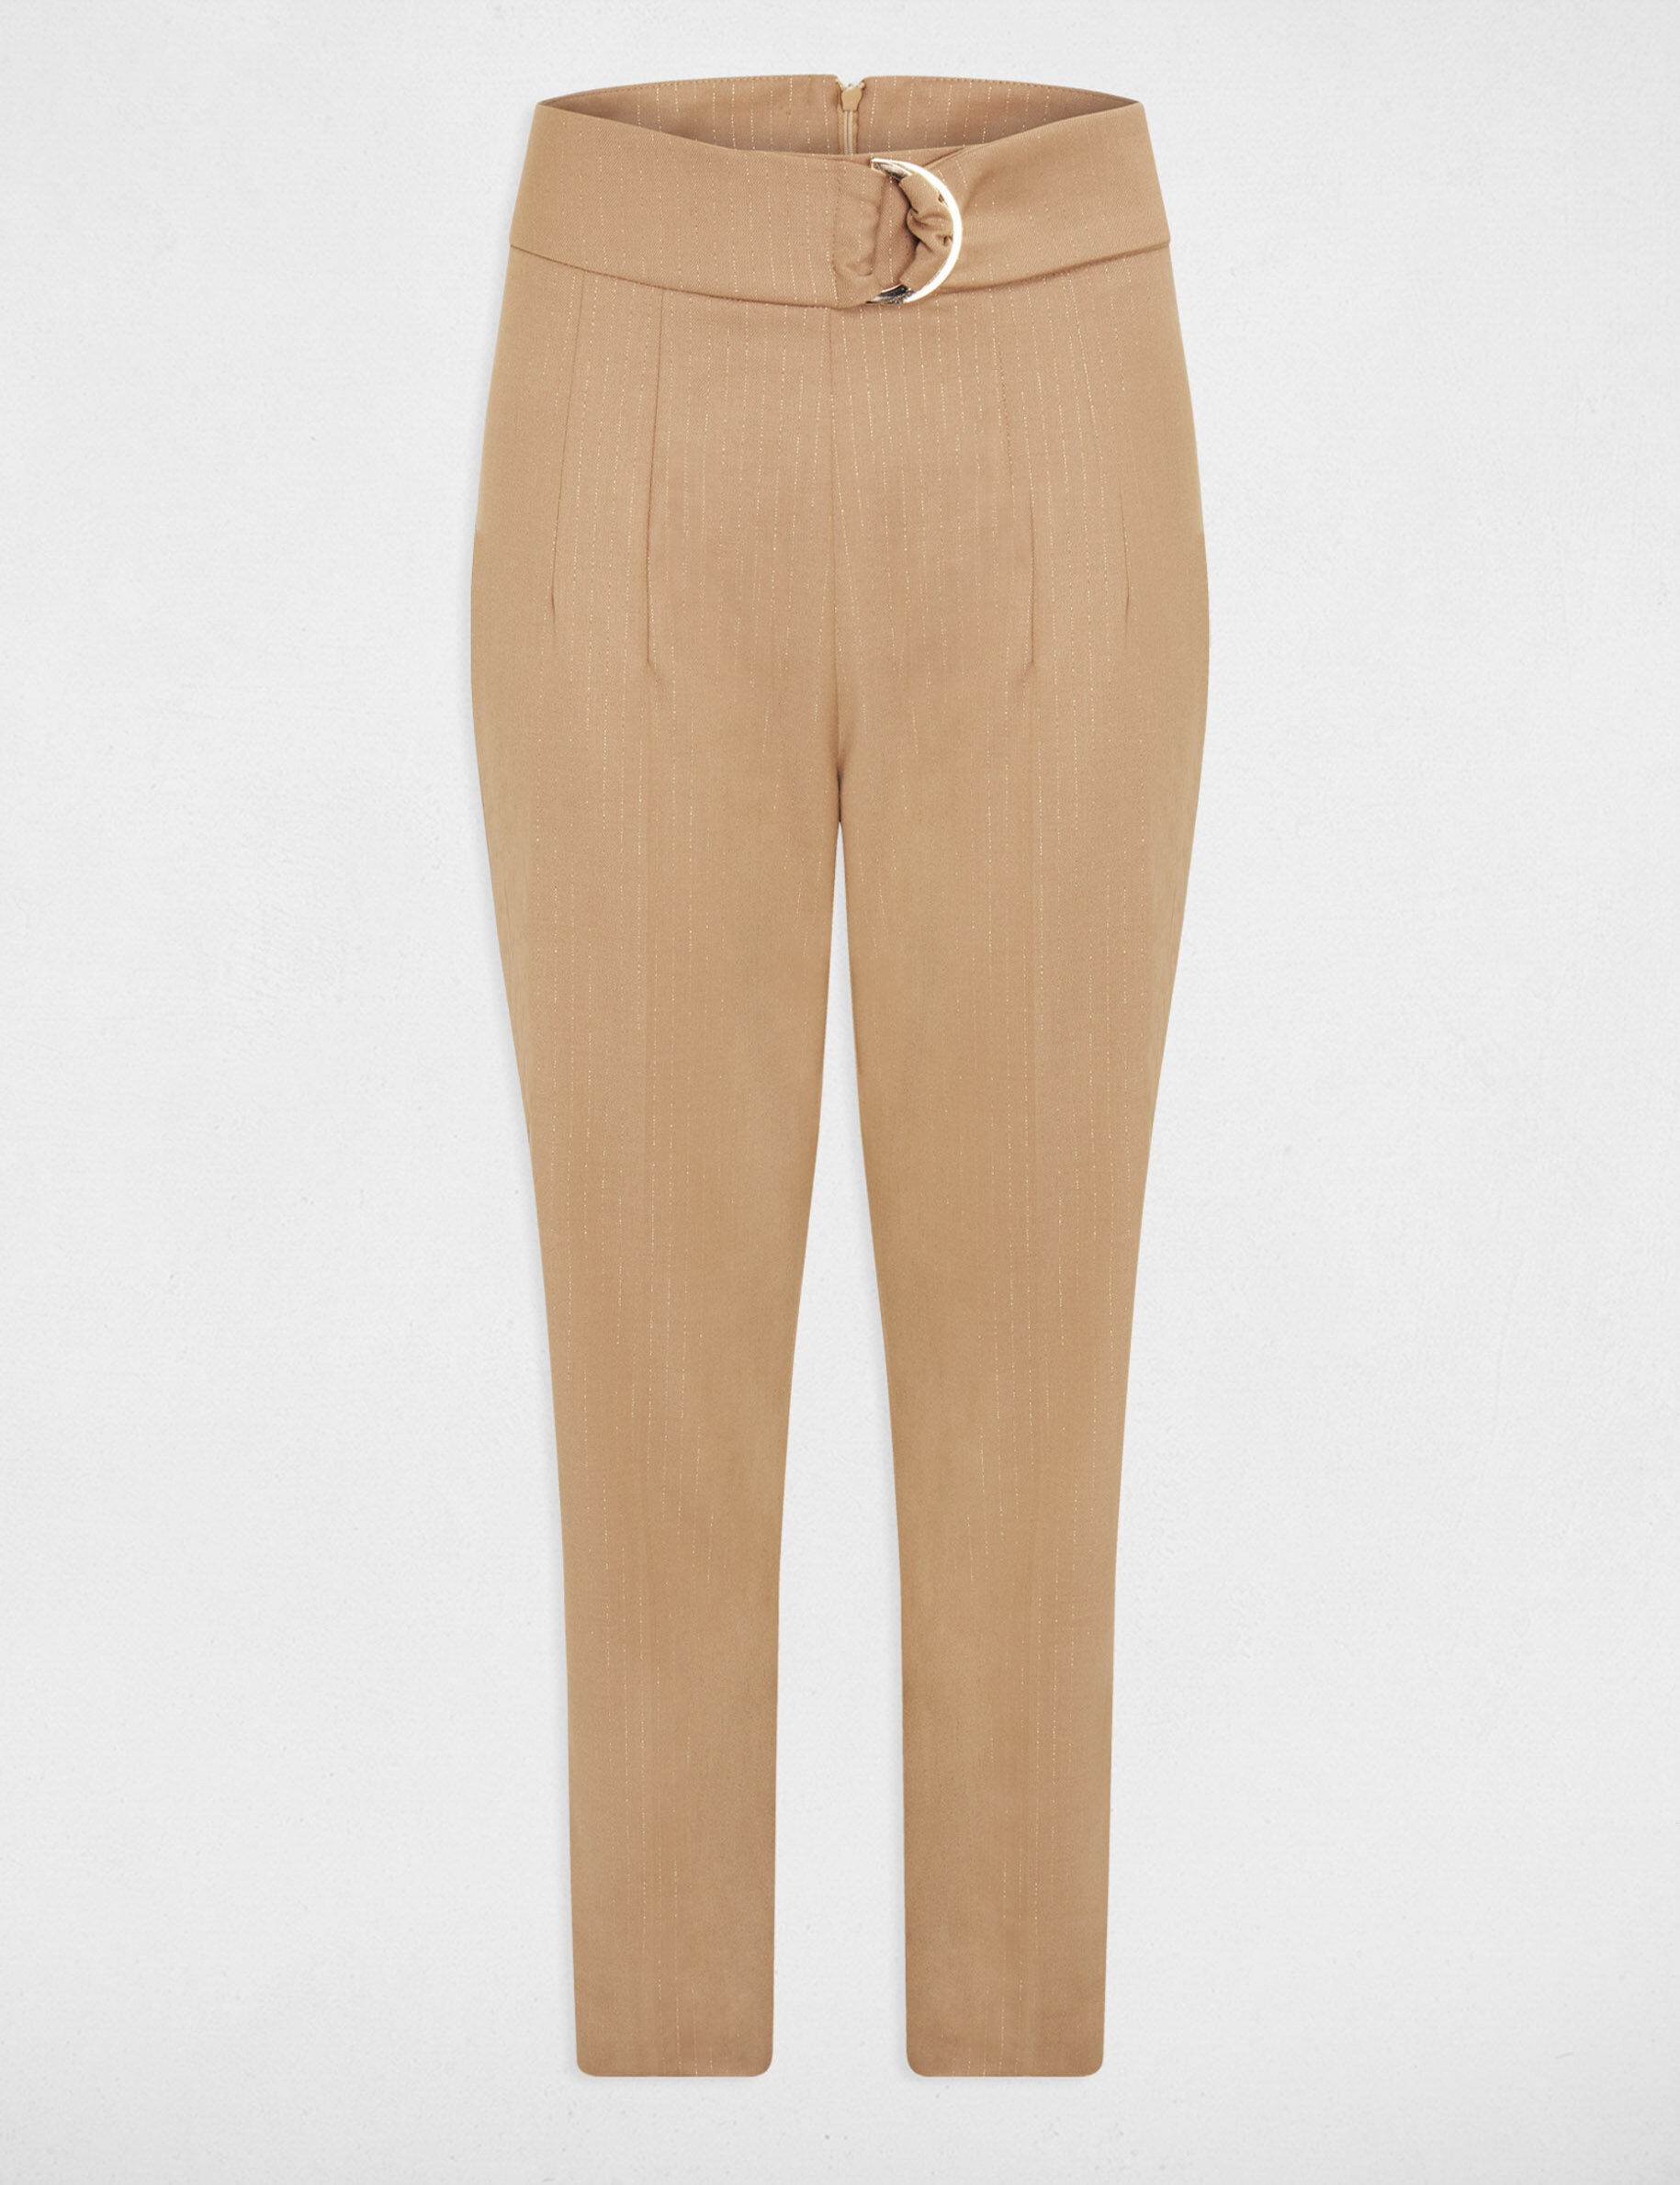 Chic Camel Athletic Dress Pants Womens For Women Elastic Waist, Soft  Straight Fit, Perfect For Spring Fashion And Jogging 210515 From Bai06,  $20.35 | DHgate.Com